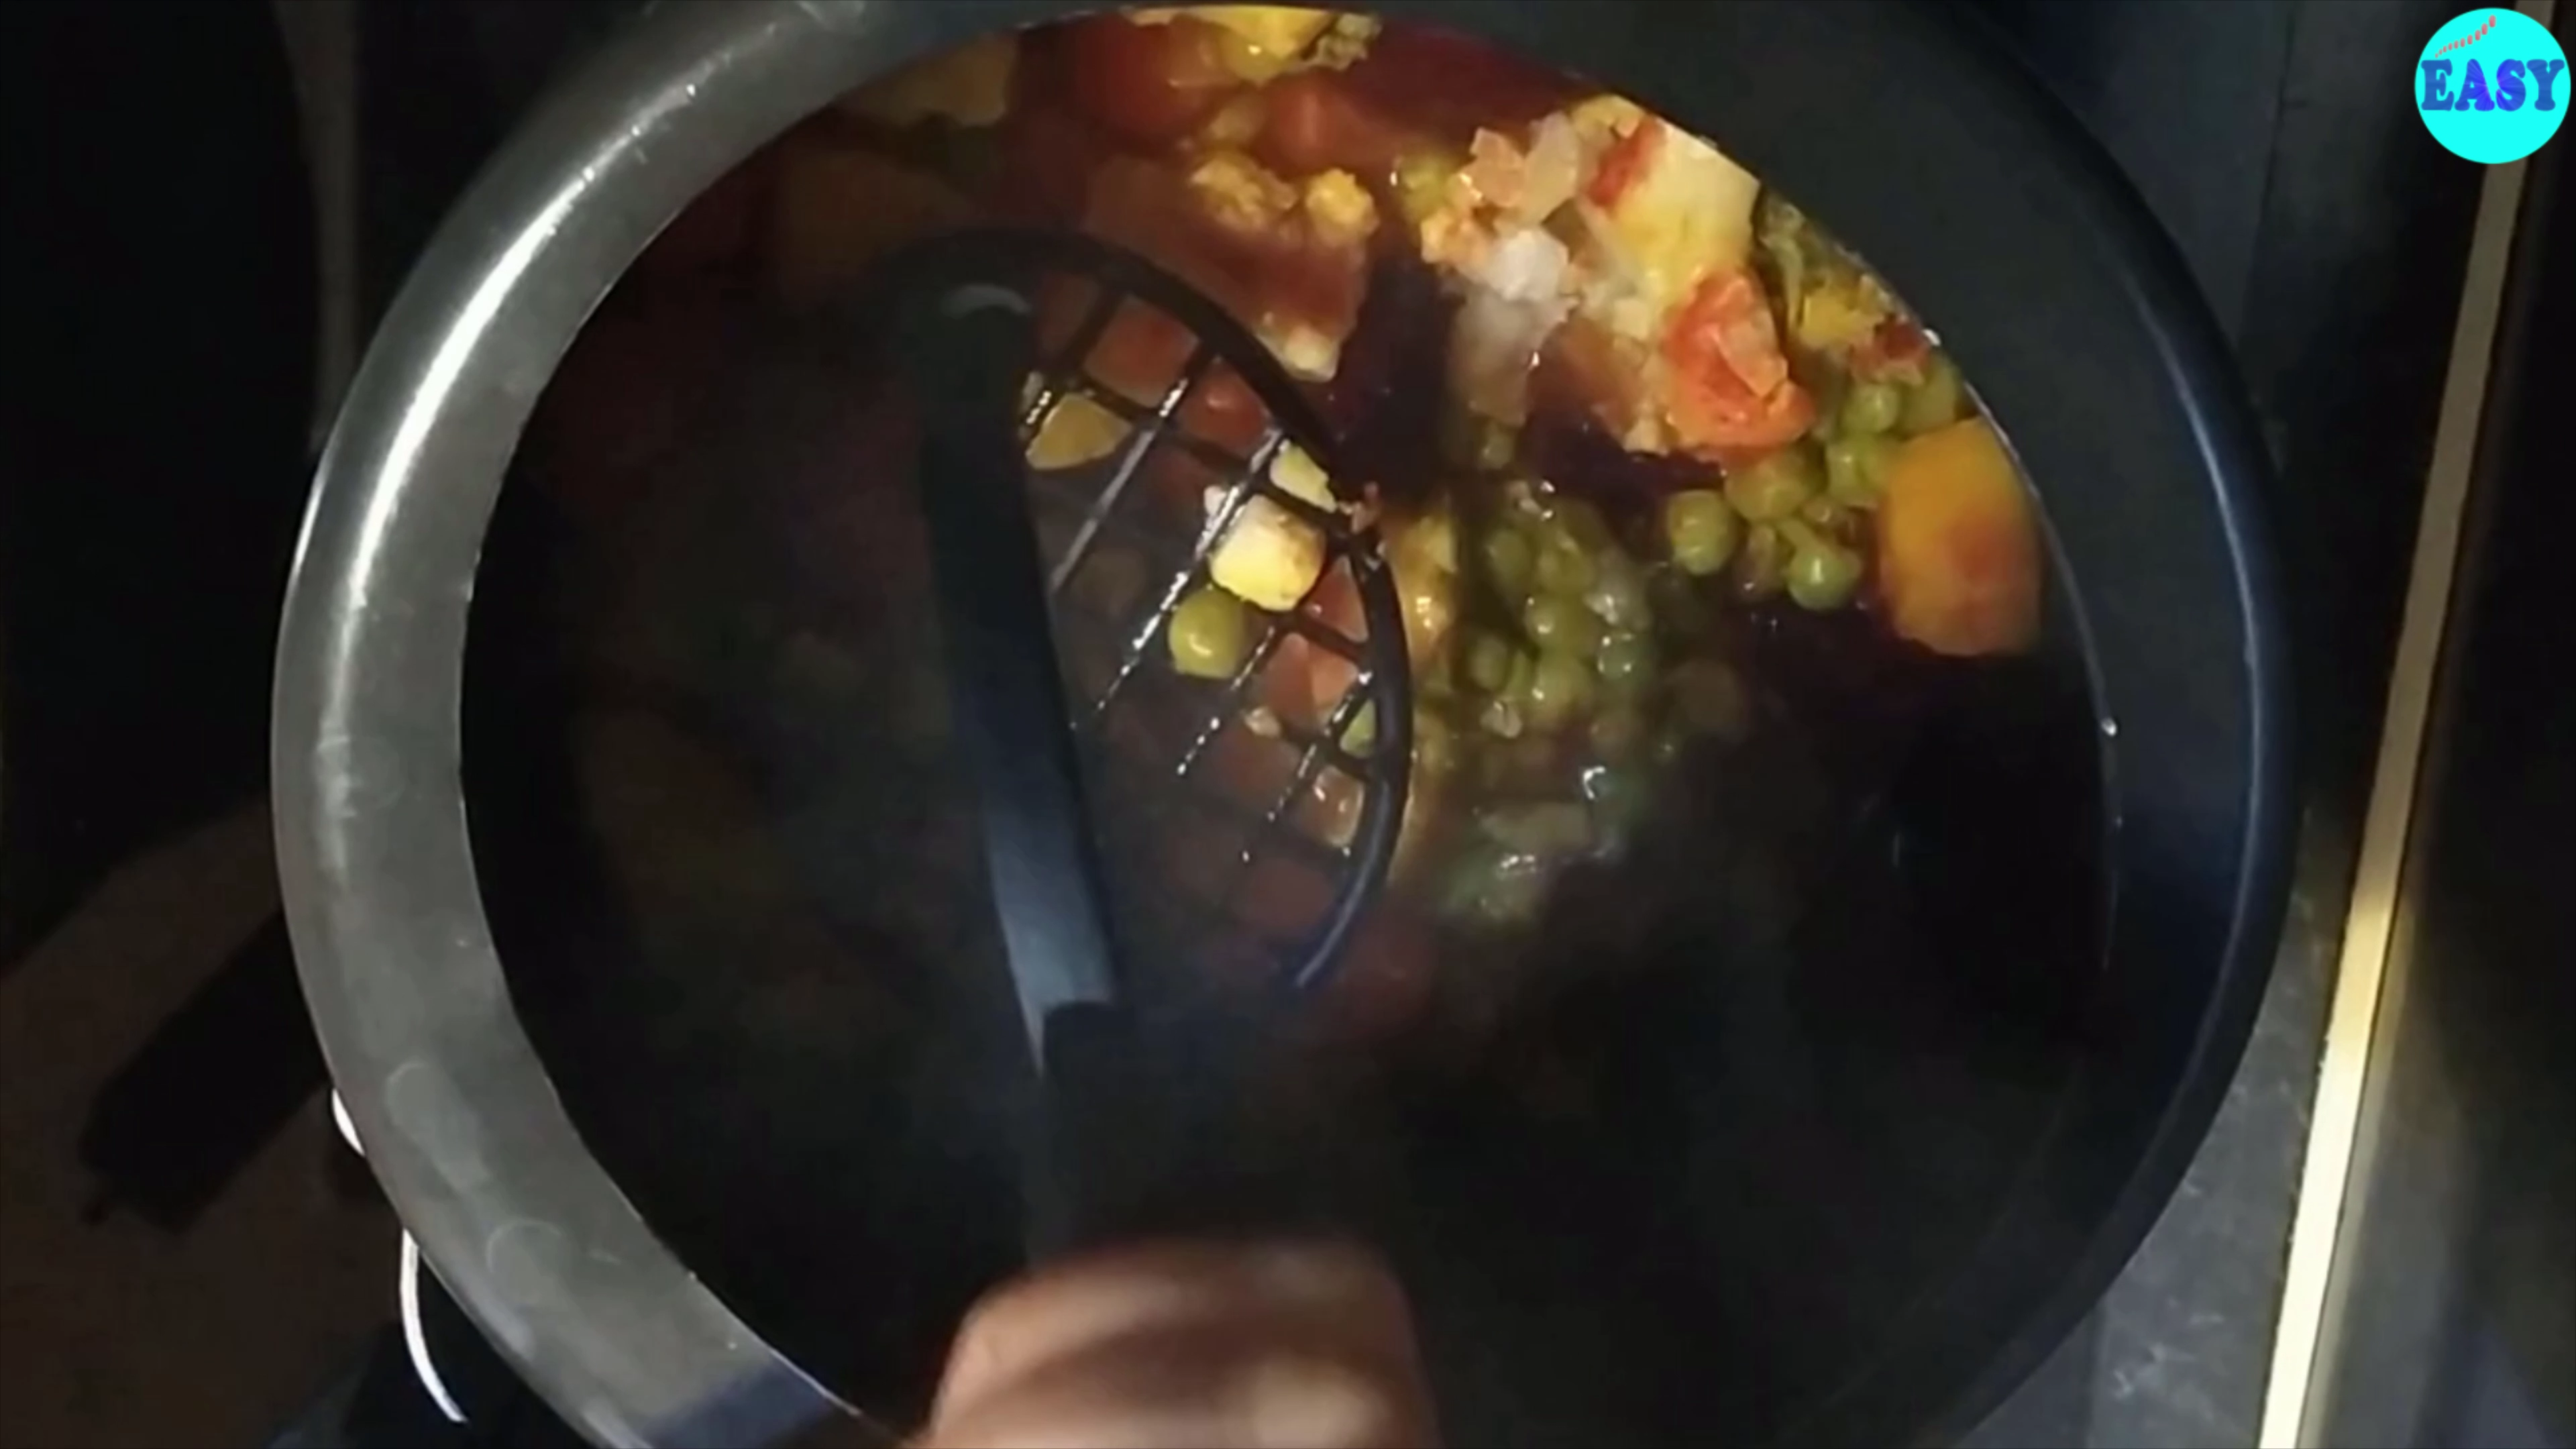 Step 3 - Now open the pressure cooker and mash the vegetables with the help of a masher or ladle.